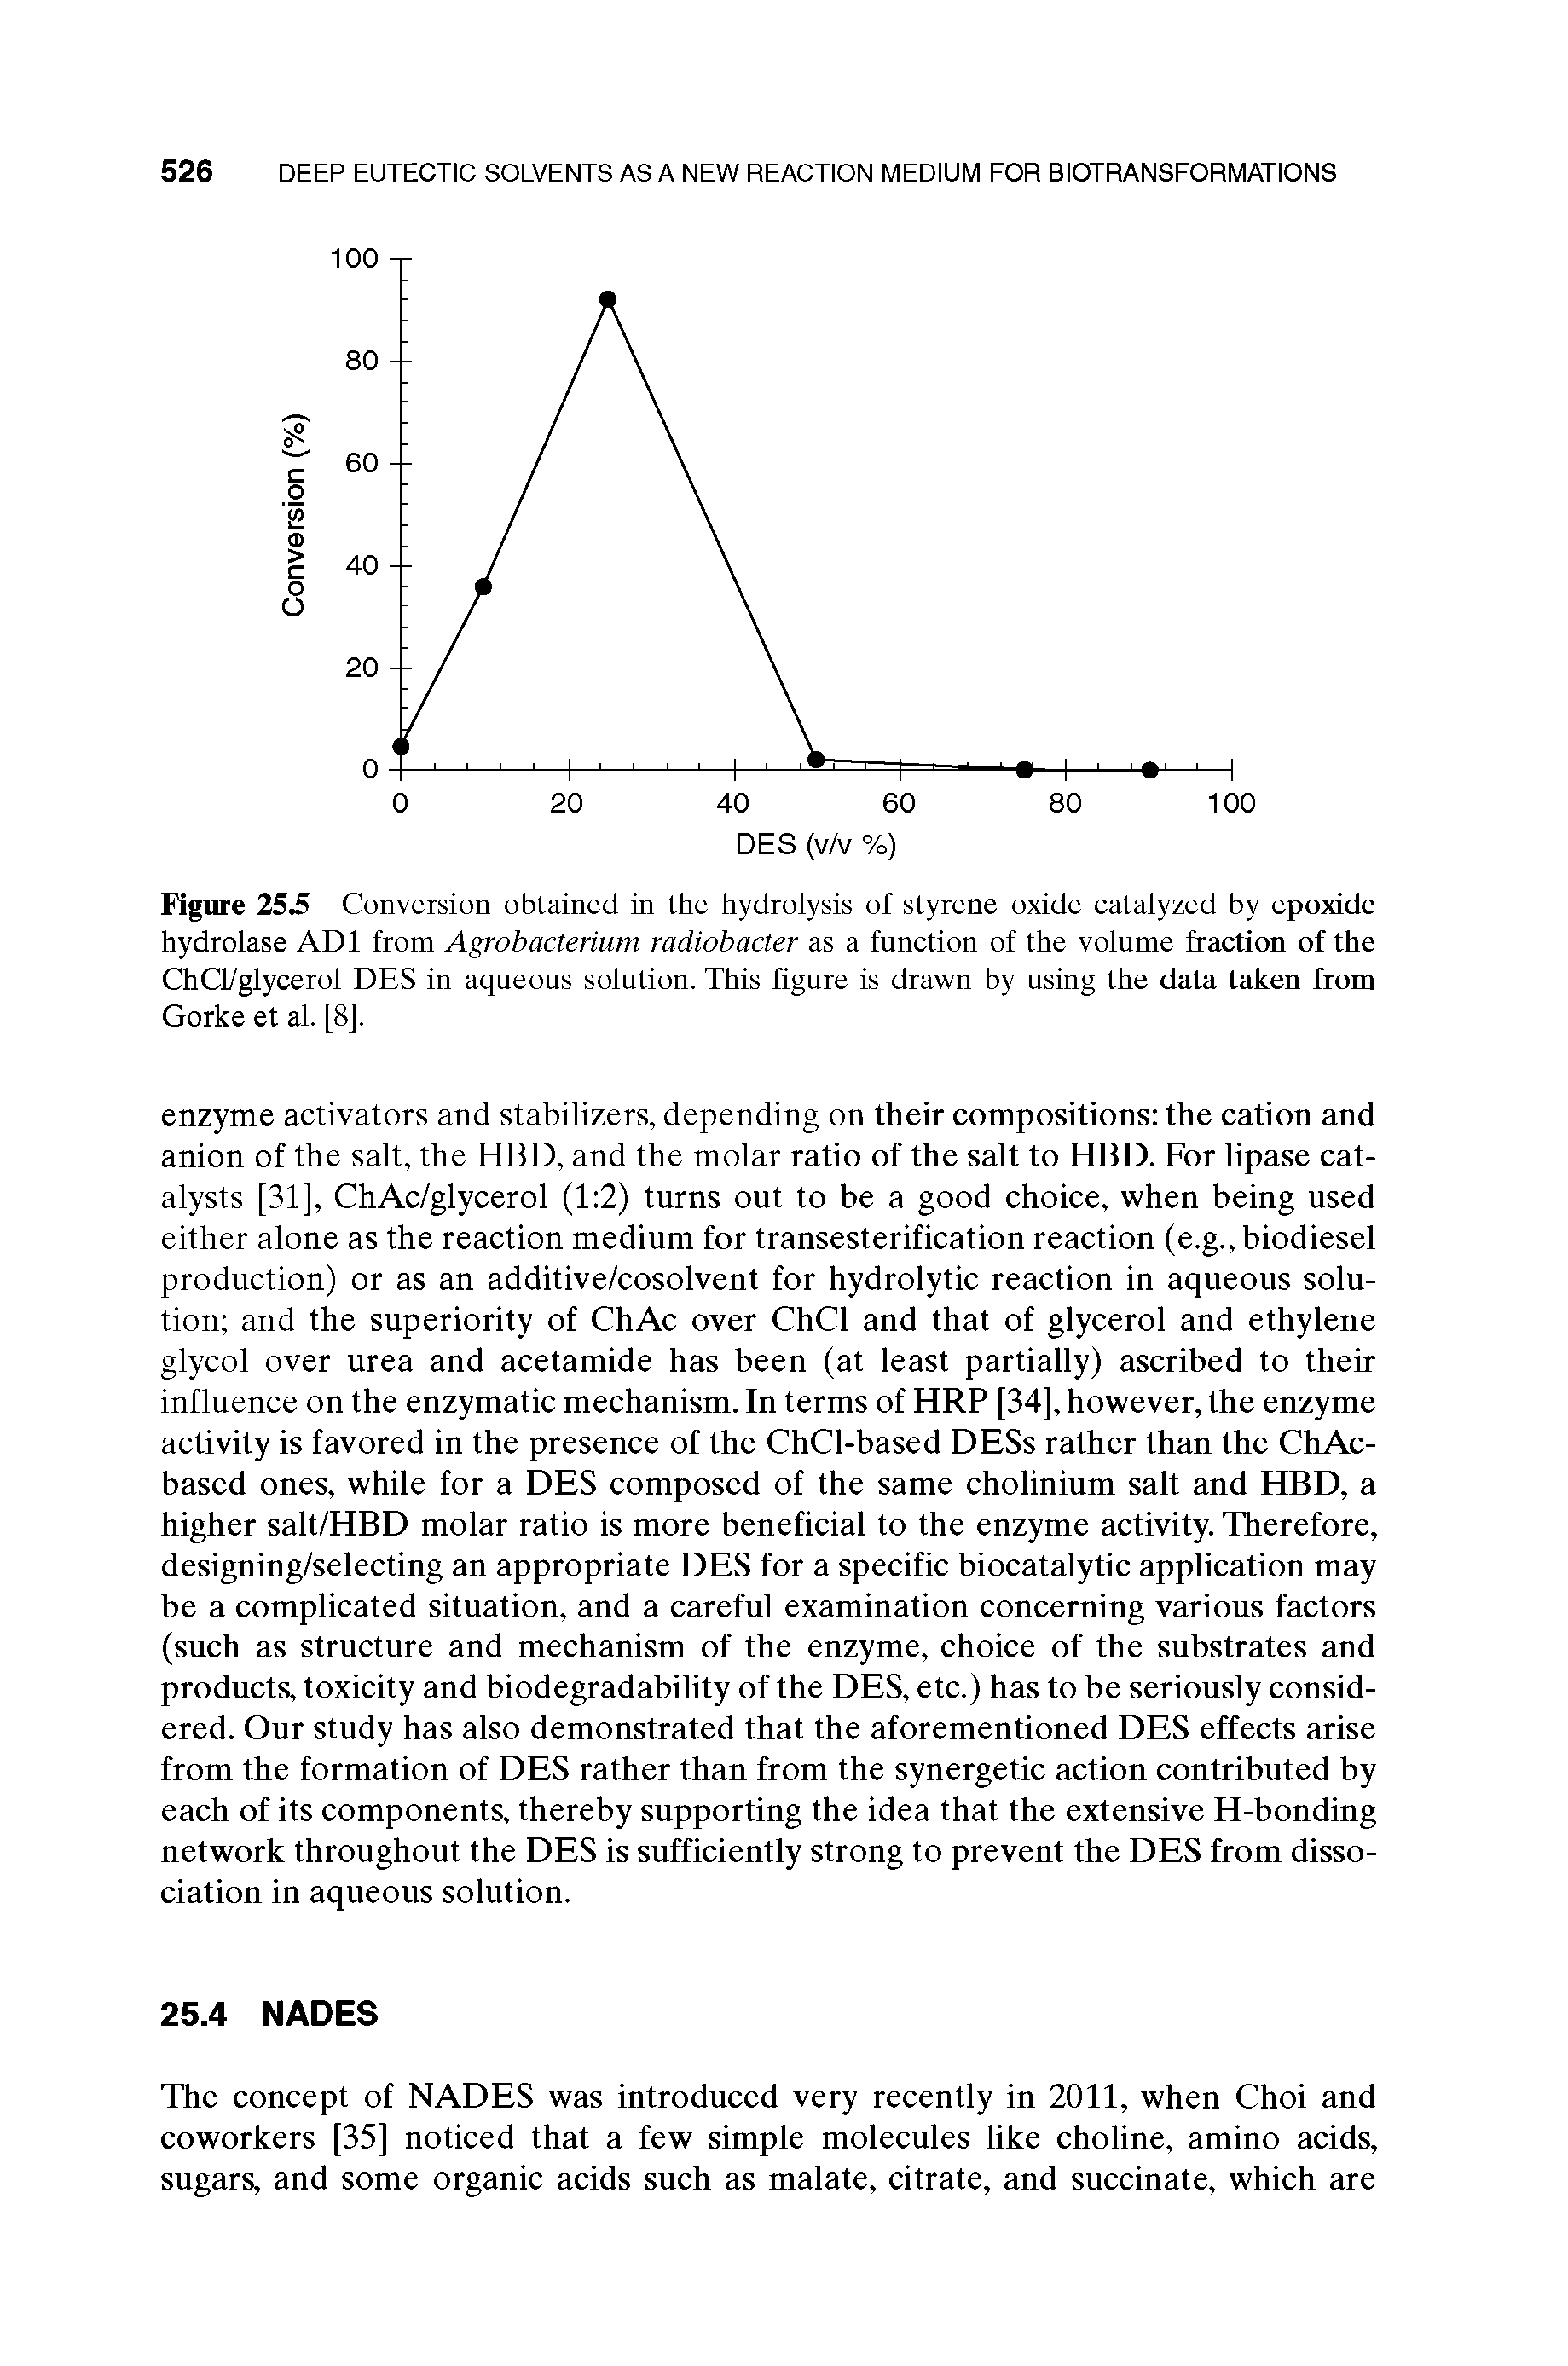 Figure 25 Conversion obtained in the hydrolysis of styrene oxide catalyzed by epoxide hydrolase ADI from Agrobacterium radiobacter as a function of the volume fraction of the ChCl/glycerol DES in aqueous solution. This figure is drawn by using the data taken from Gorke et al. [8],...